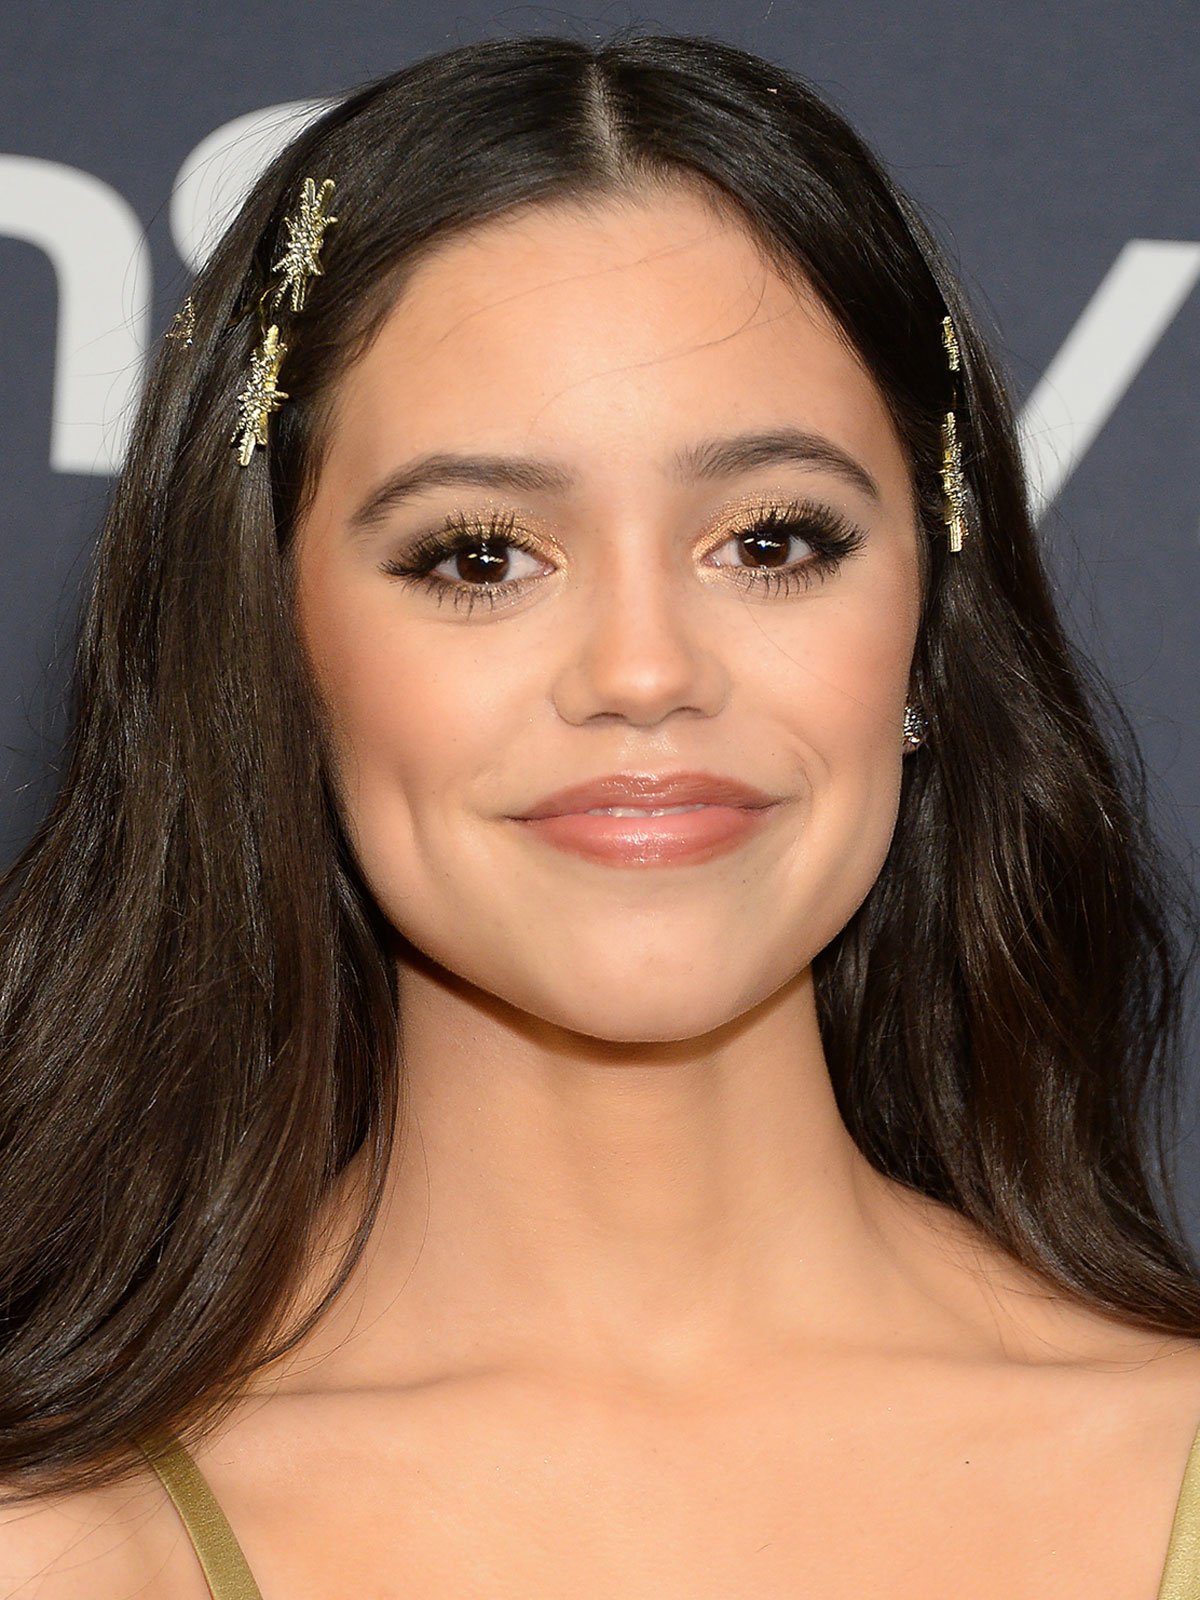 How Old Is Jenna Ortega Jenna Ortega Facts About The You Star